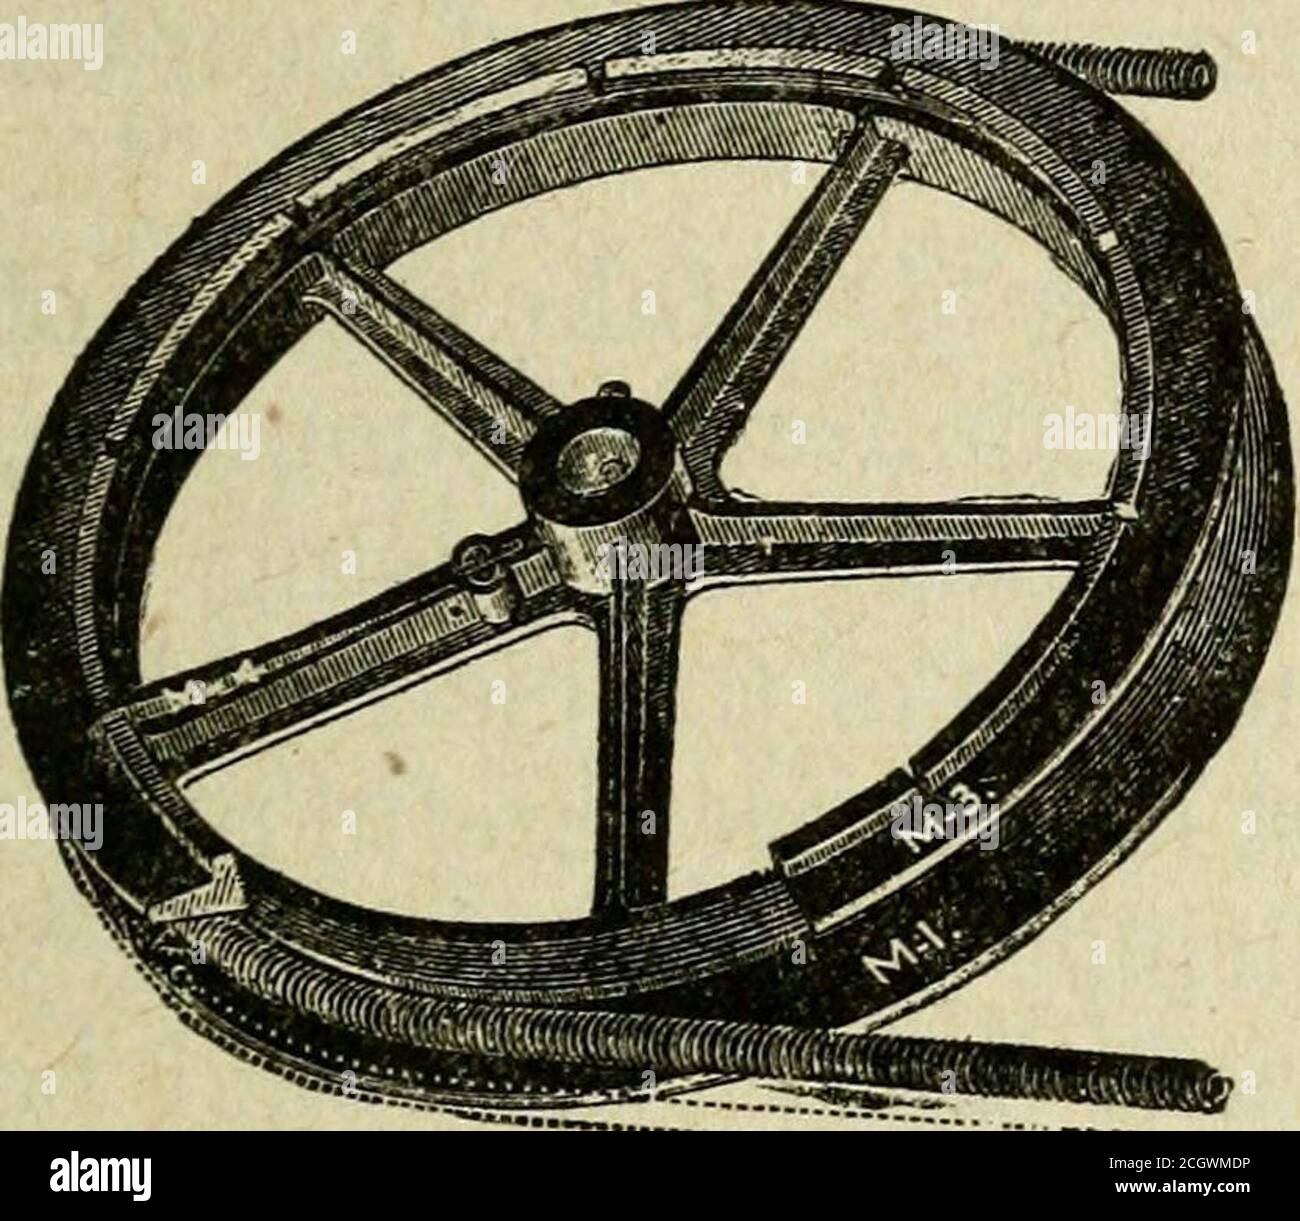 . Science of railways . with pony truck, it can be so placed byremoving the spool plate and loosening the set screwthat holds the clutch in center of shaft, then removethe shaft and end bearings and reverse them. The worms and clutch collarshould be left in position.Recorder pulley.—Theflange M-3 is screwedonto the main part M-1,and is held in positionby latch M-4. The di-ameter is adjusted, or the_ point at which the belt Fig. a runs is varied, by mov- RecorderPulley—Boyer Speed • ^r, ^ ± ^ Recorder. lug thc flange to or from the main part. This adjustment is enough to allowfor a change of ab Stock Photo